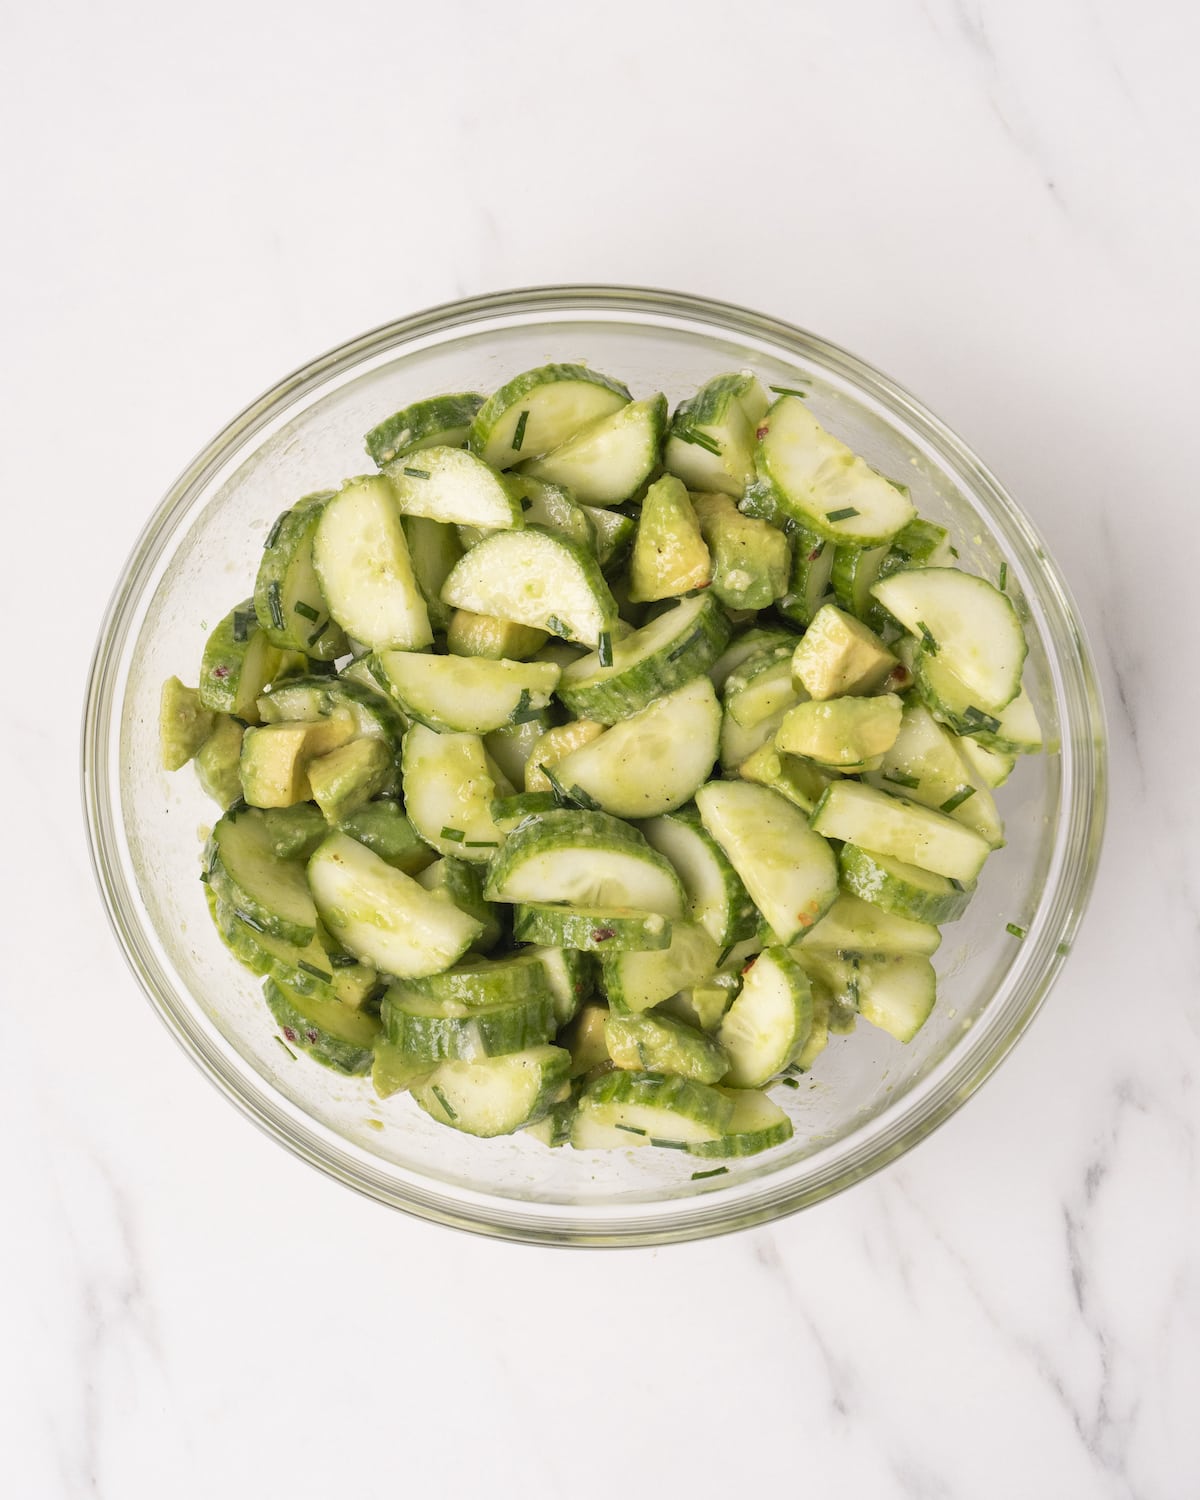 Diced cucumber and diced avocado combined with oil and lemon and seasoning mixture in a clear white bowl on top of a white countertop.